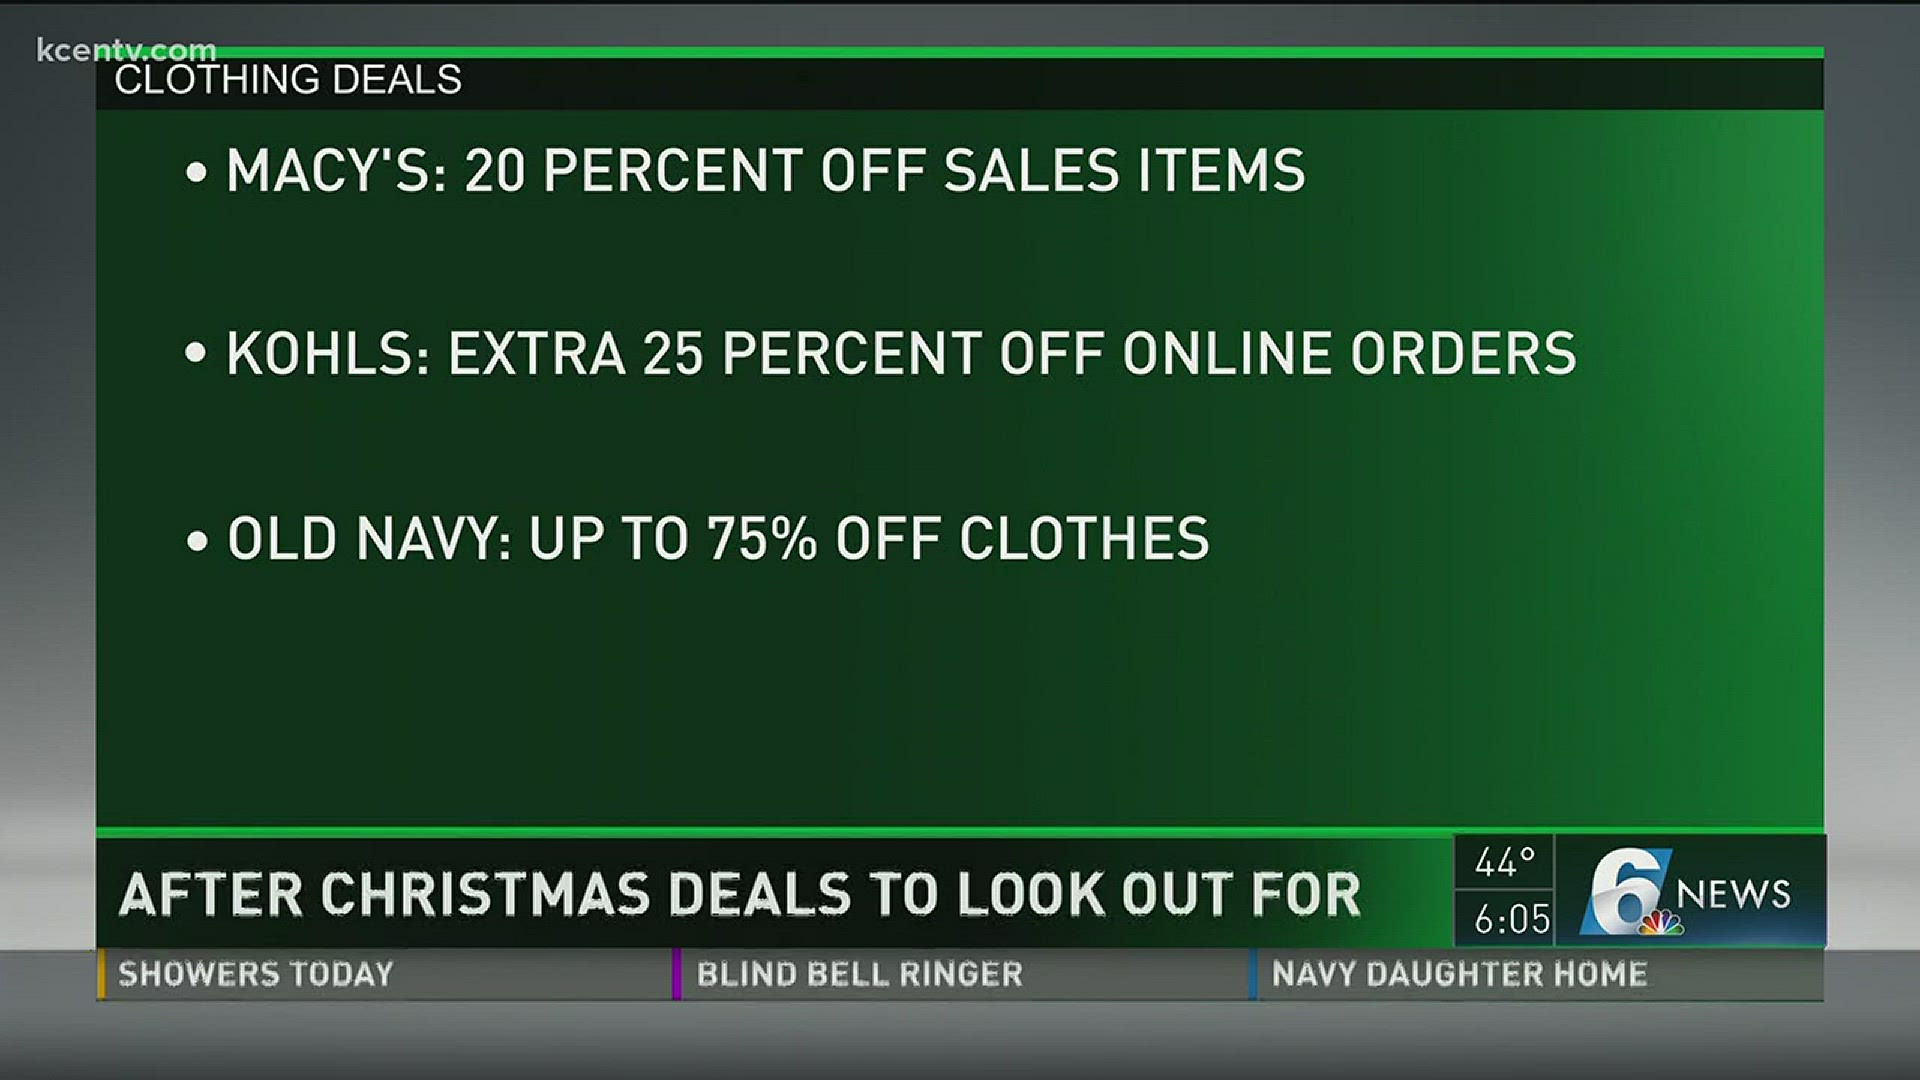 Deals to look for after the holidays.